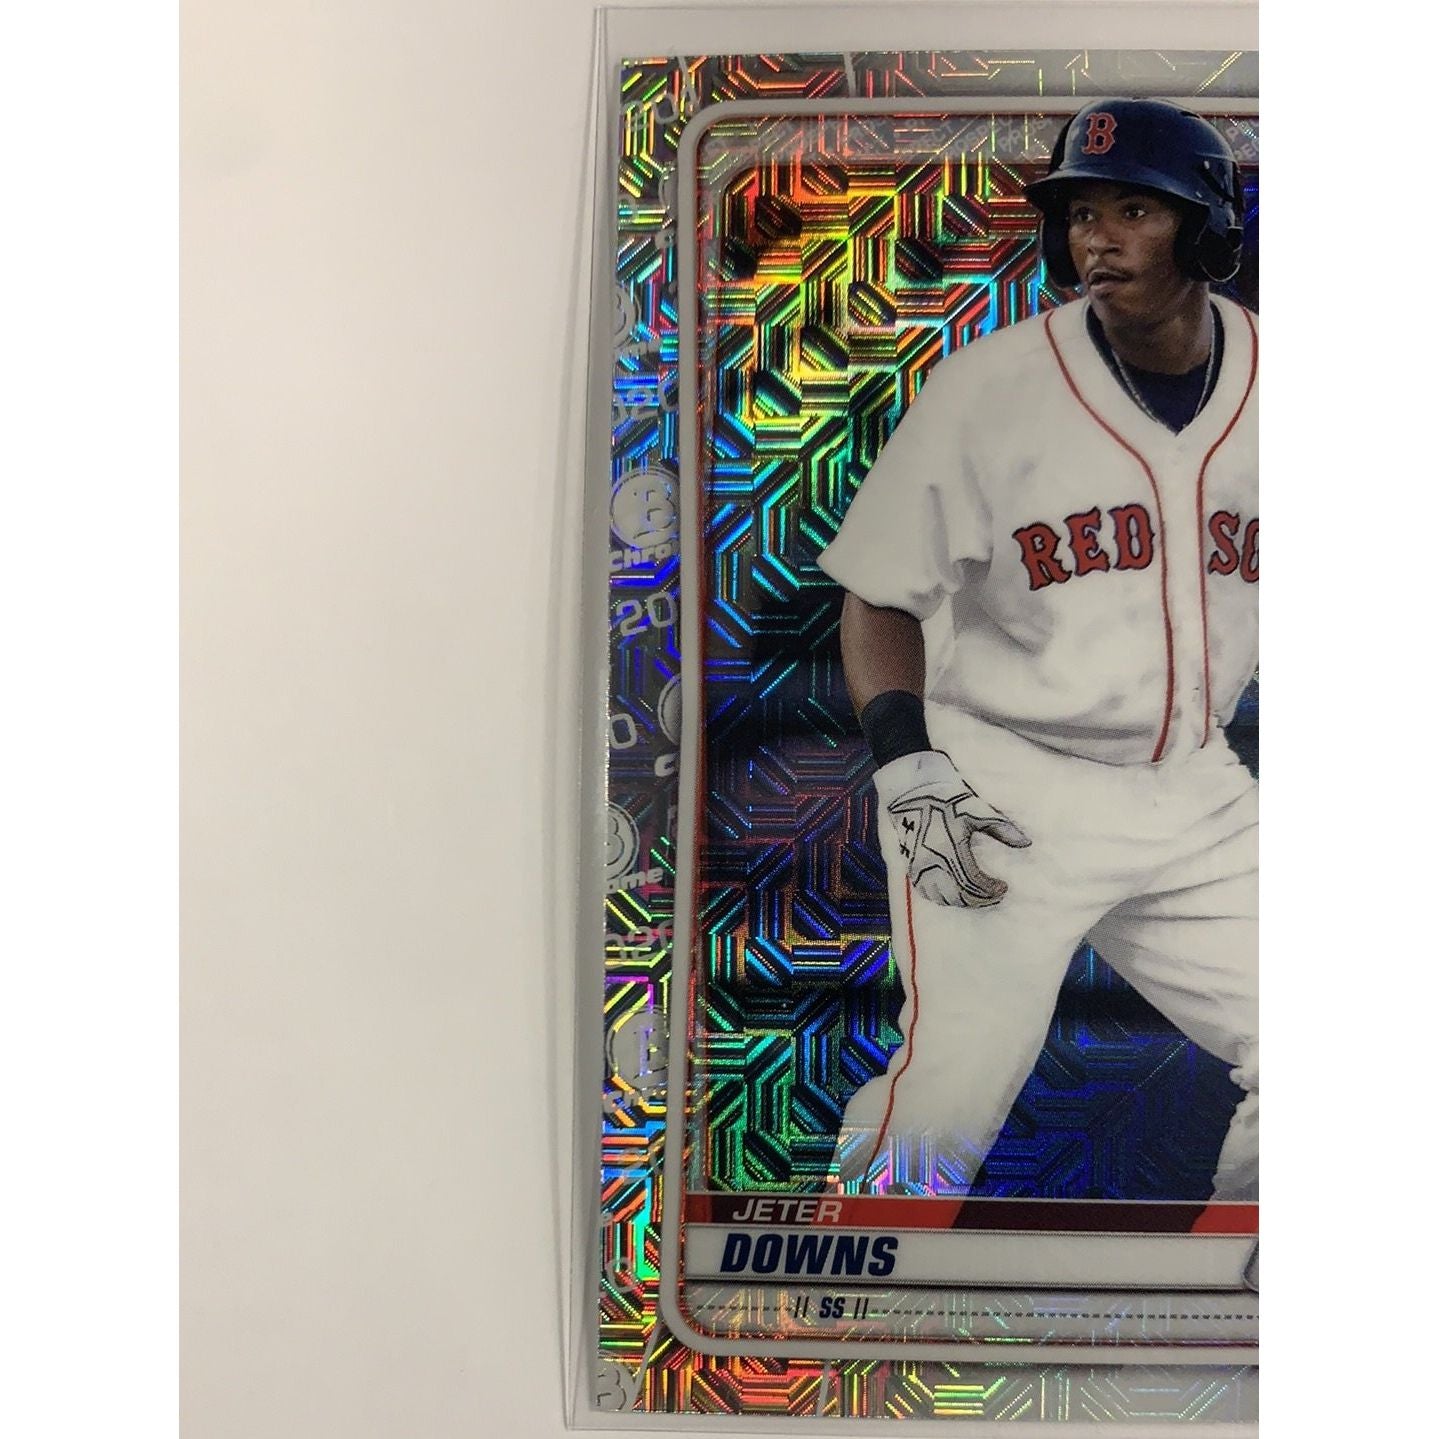  2020 Bowman Chrome Jeter Down Mojo Refractor  Local Legends Cards & Collectibles